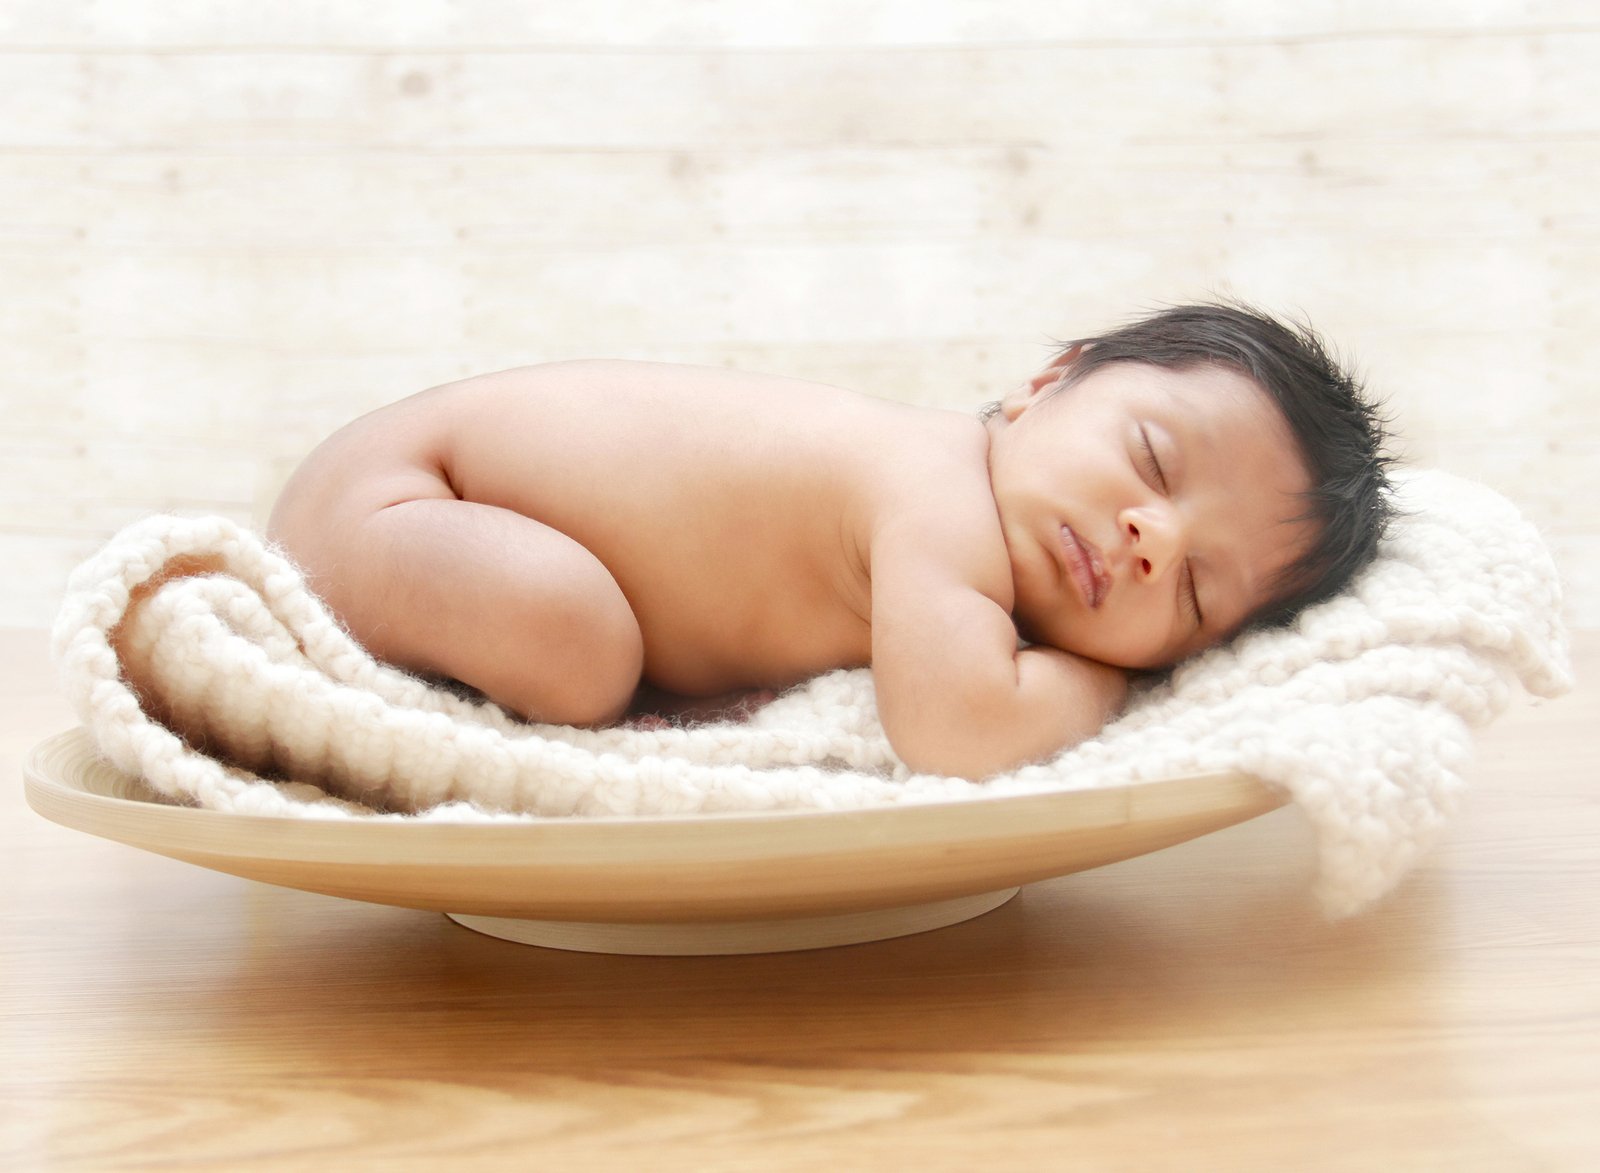 Baby Sleeping in a Wooden Bowl with a blanket | Baby Sleep Training Expert Sleep Consultant | The Peaceful Sleeper